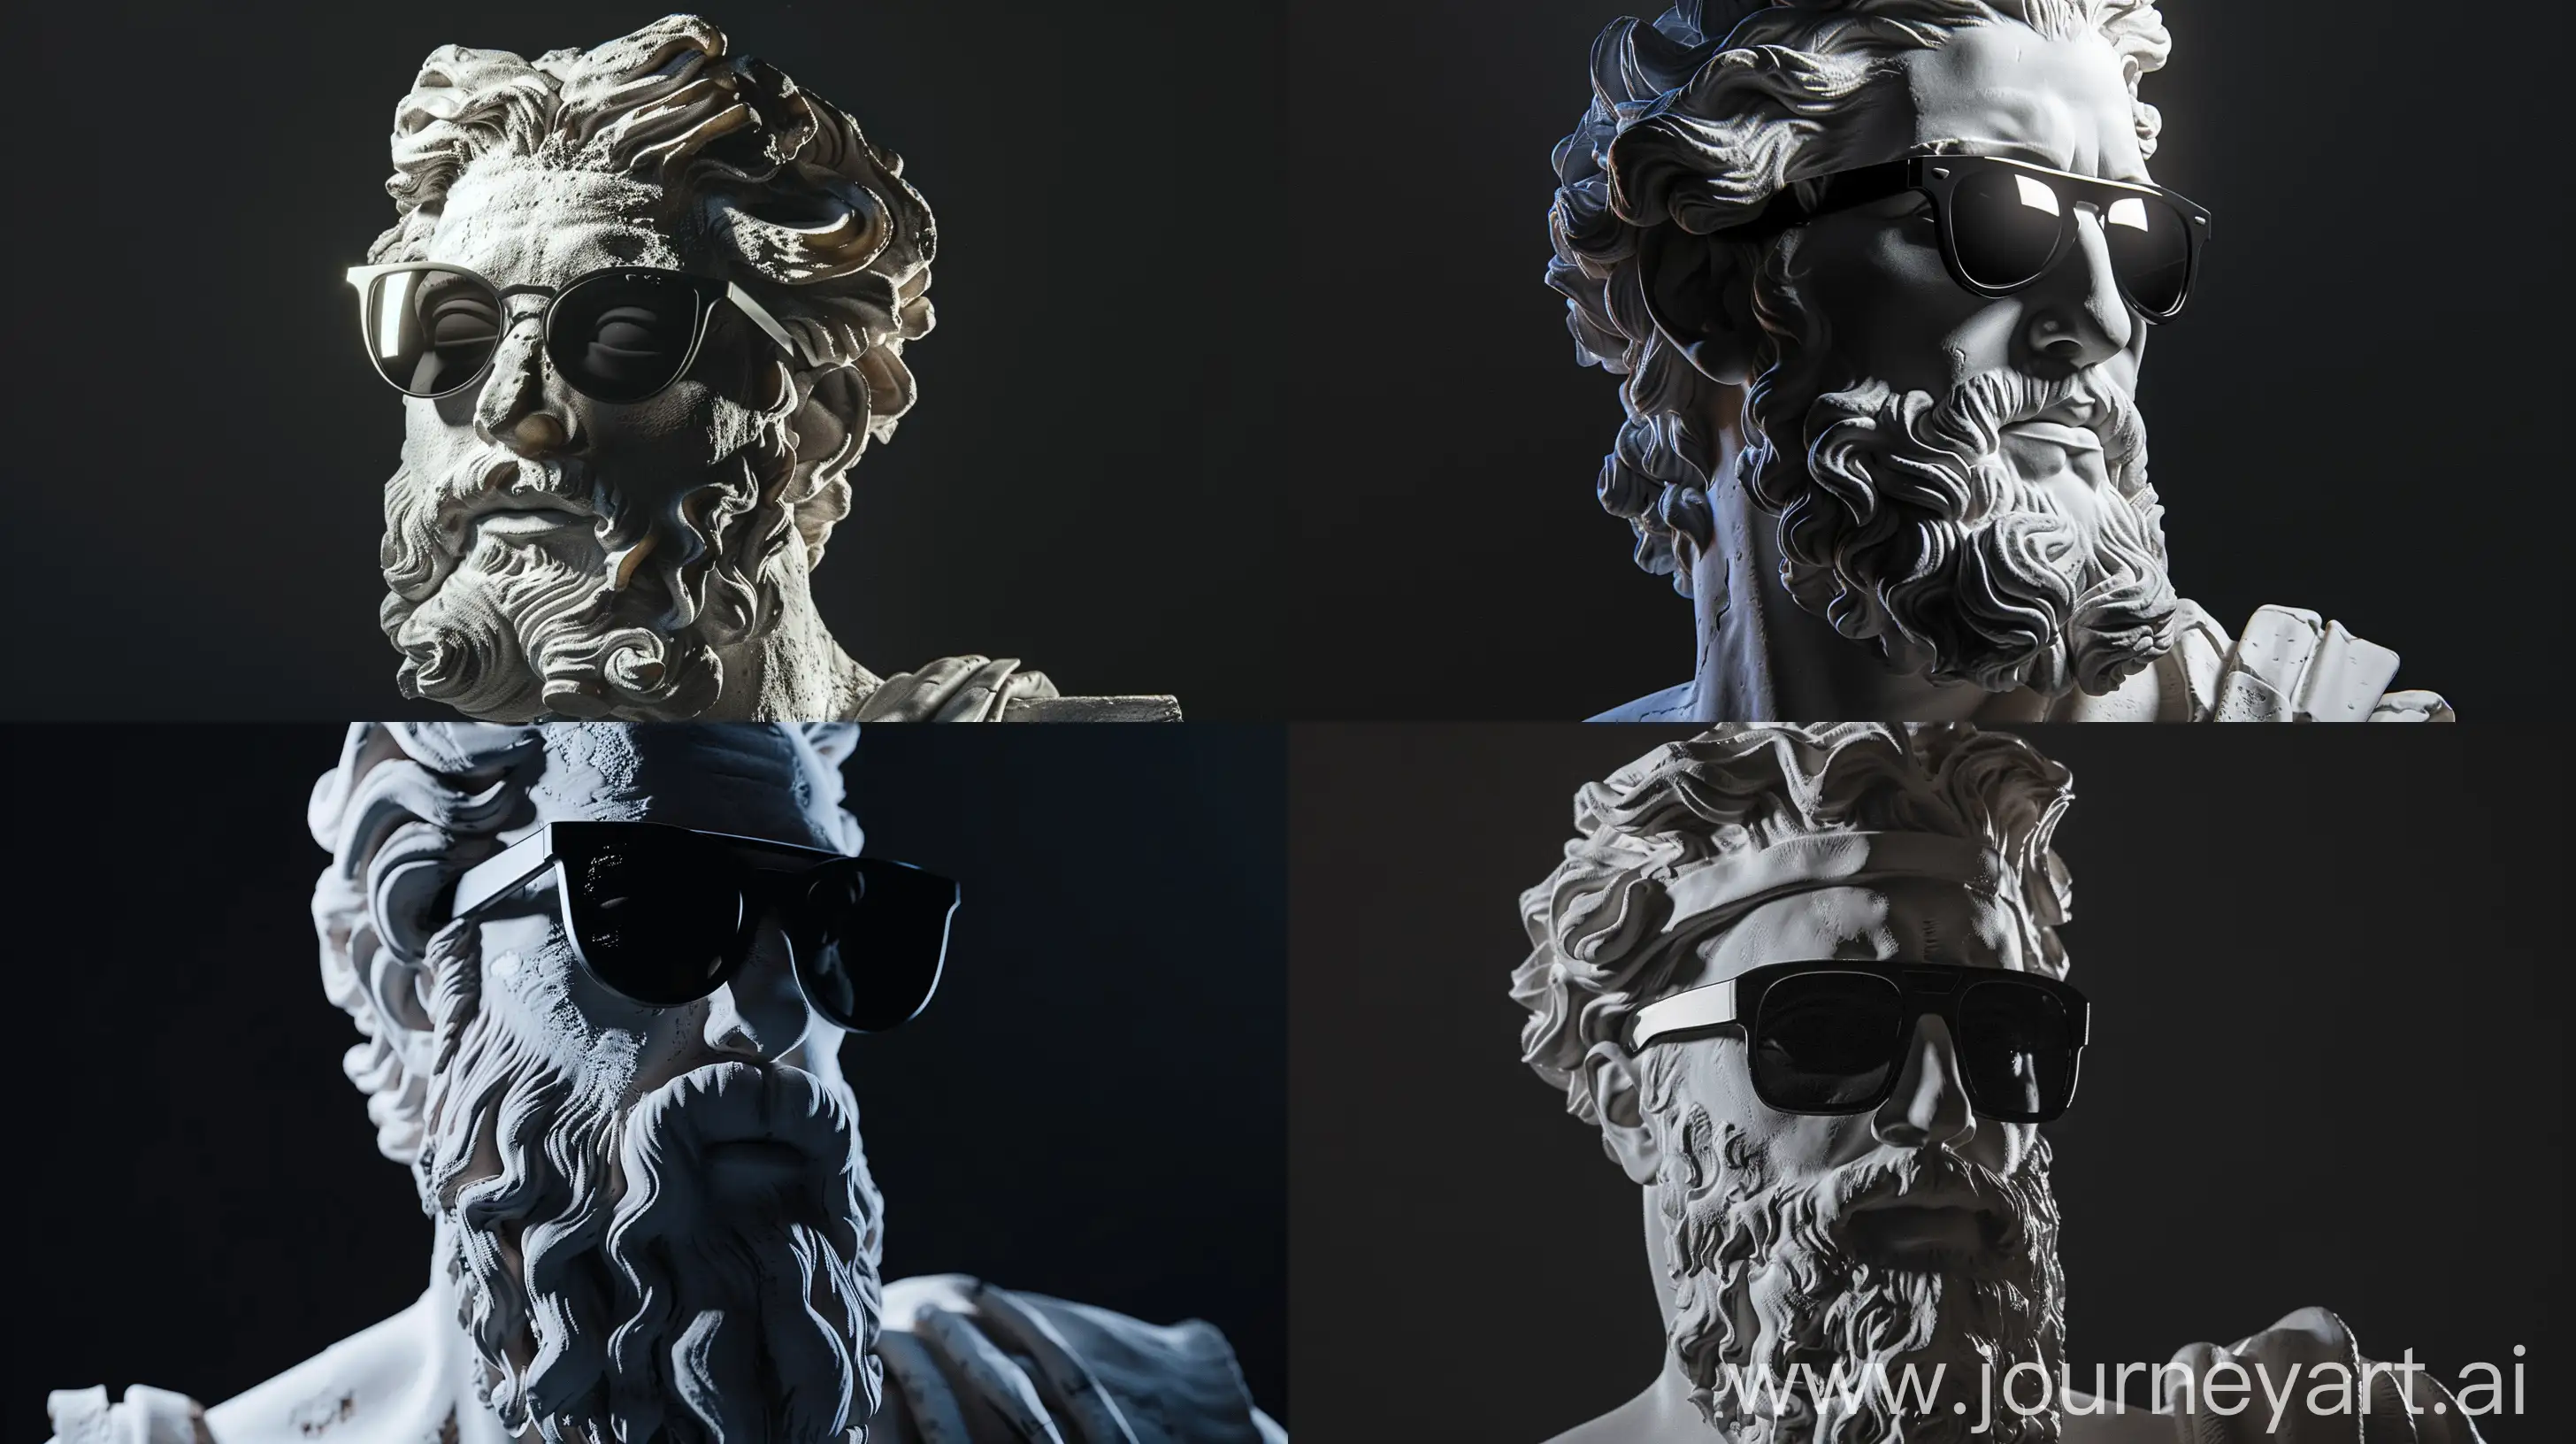 Modern-Zeus-Sculpture-with-Black-Sunglasses-and-White-Reflections